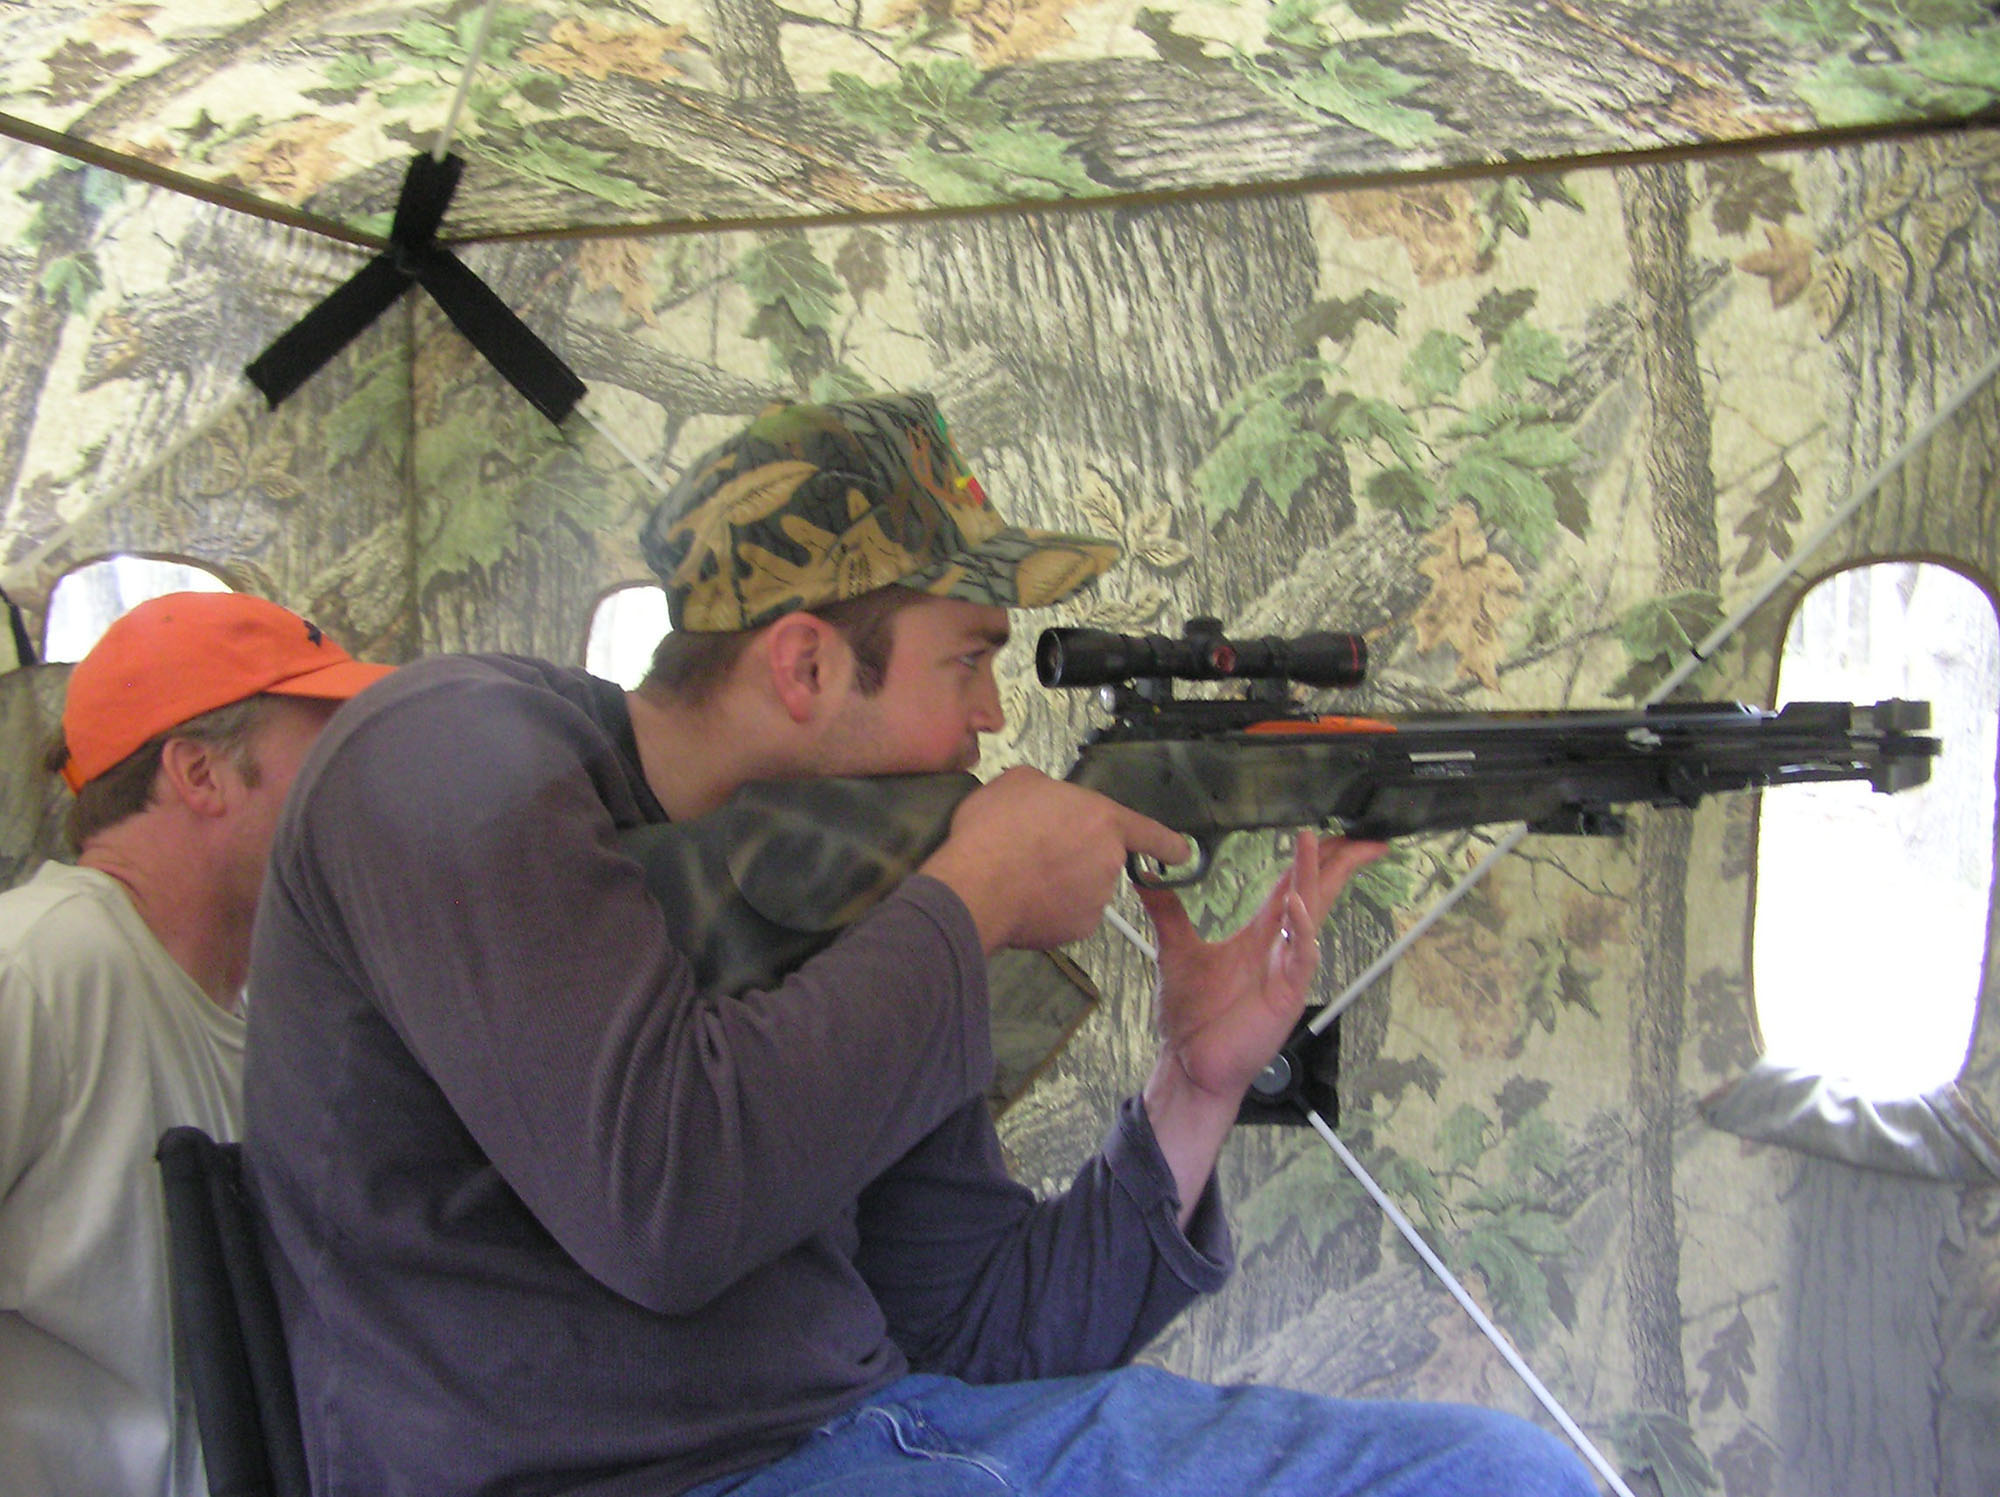 Crossbow hunting has been allowed during archery deer season in Wisconsin since 2013.